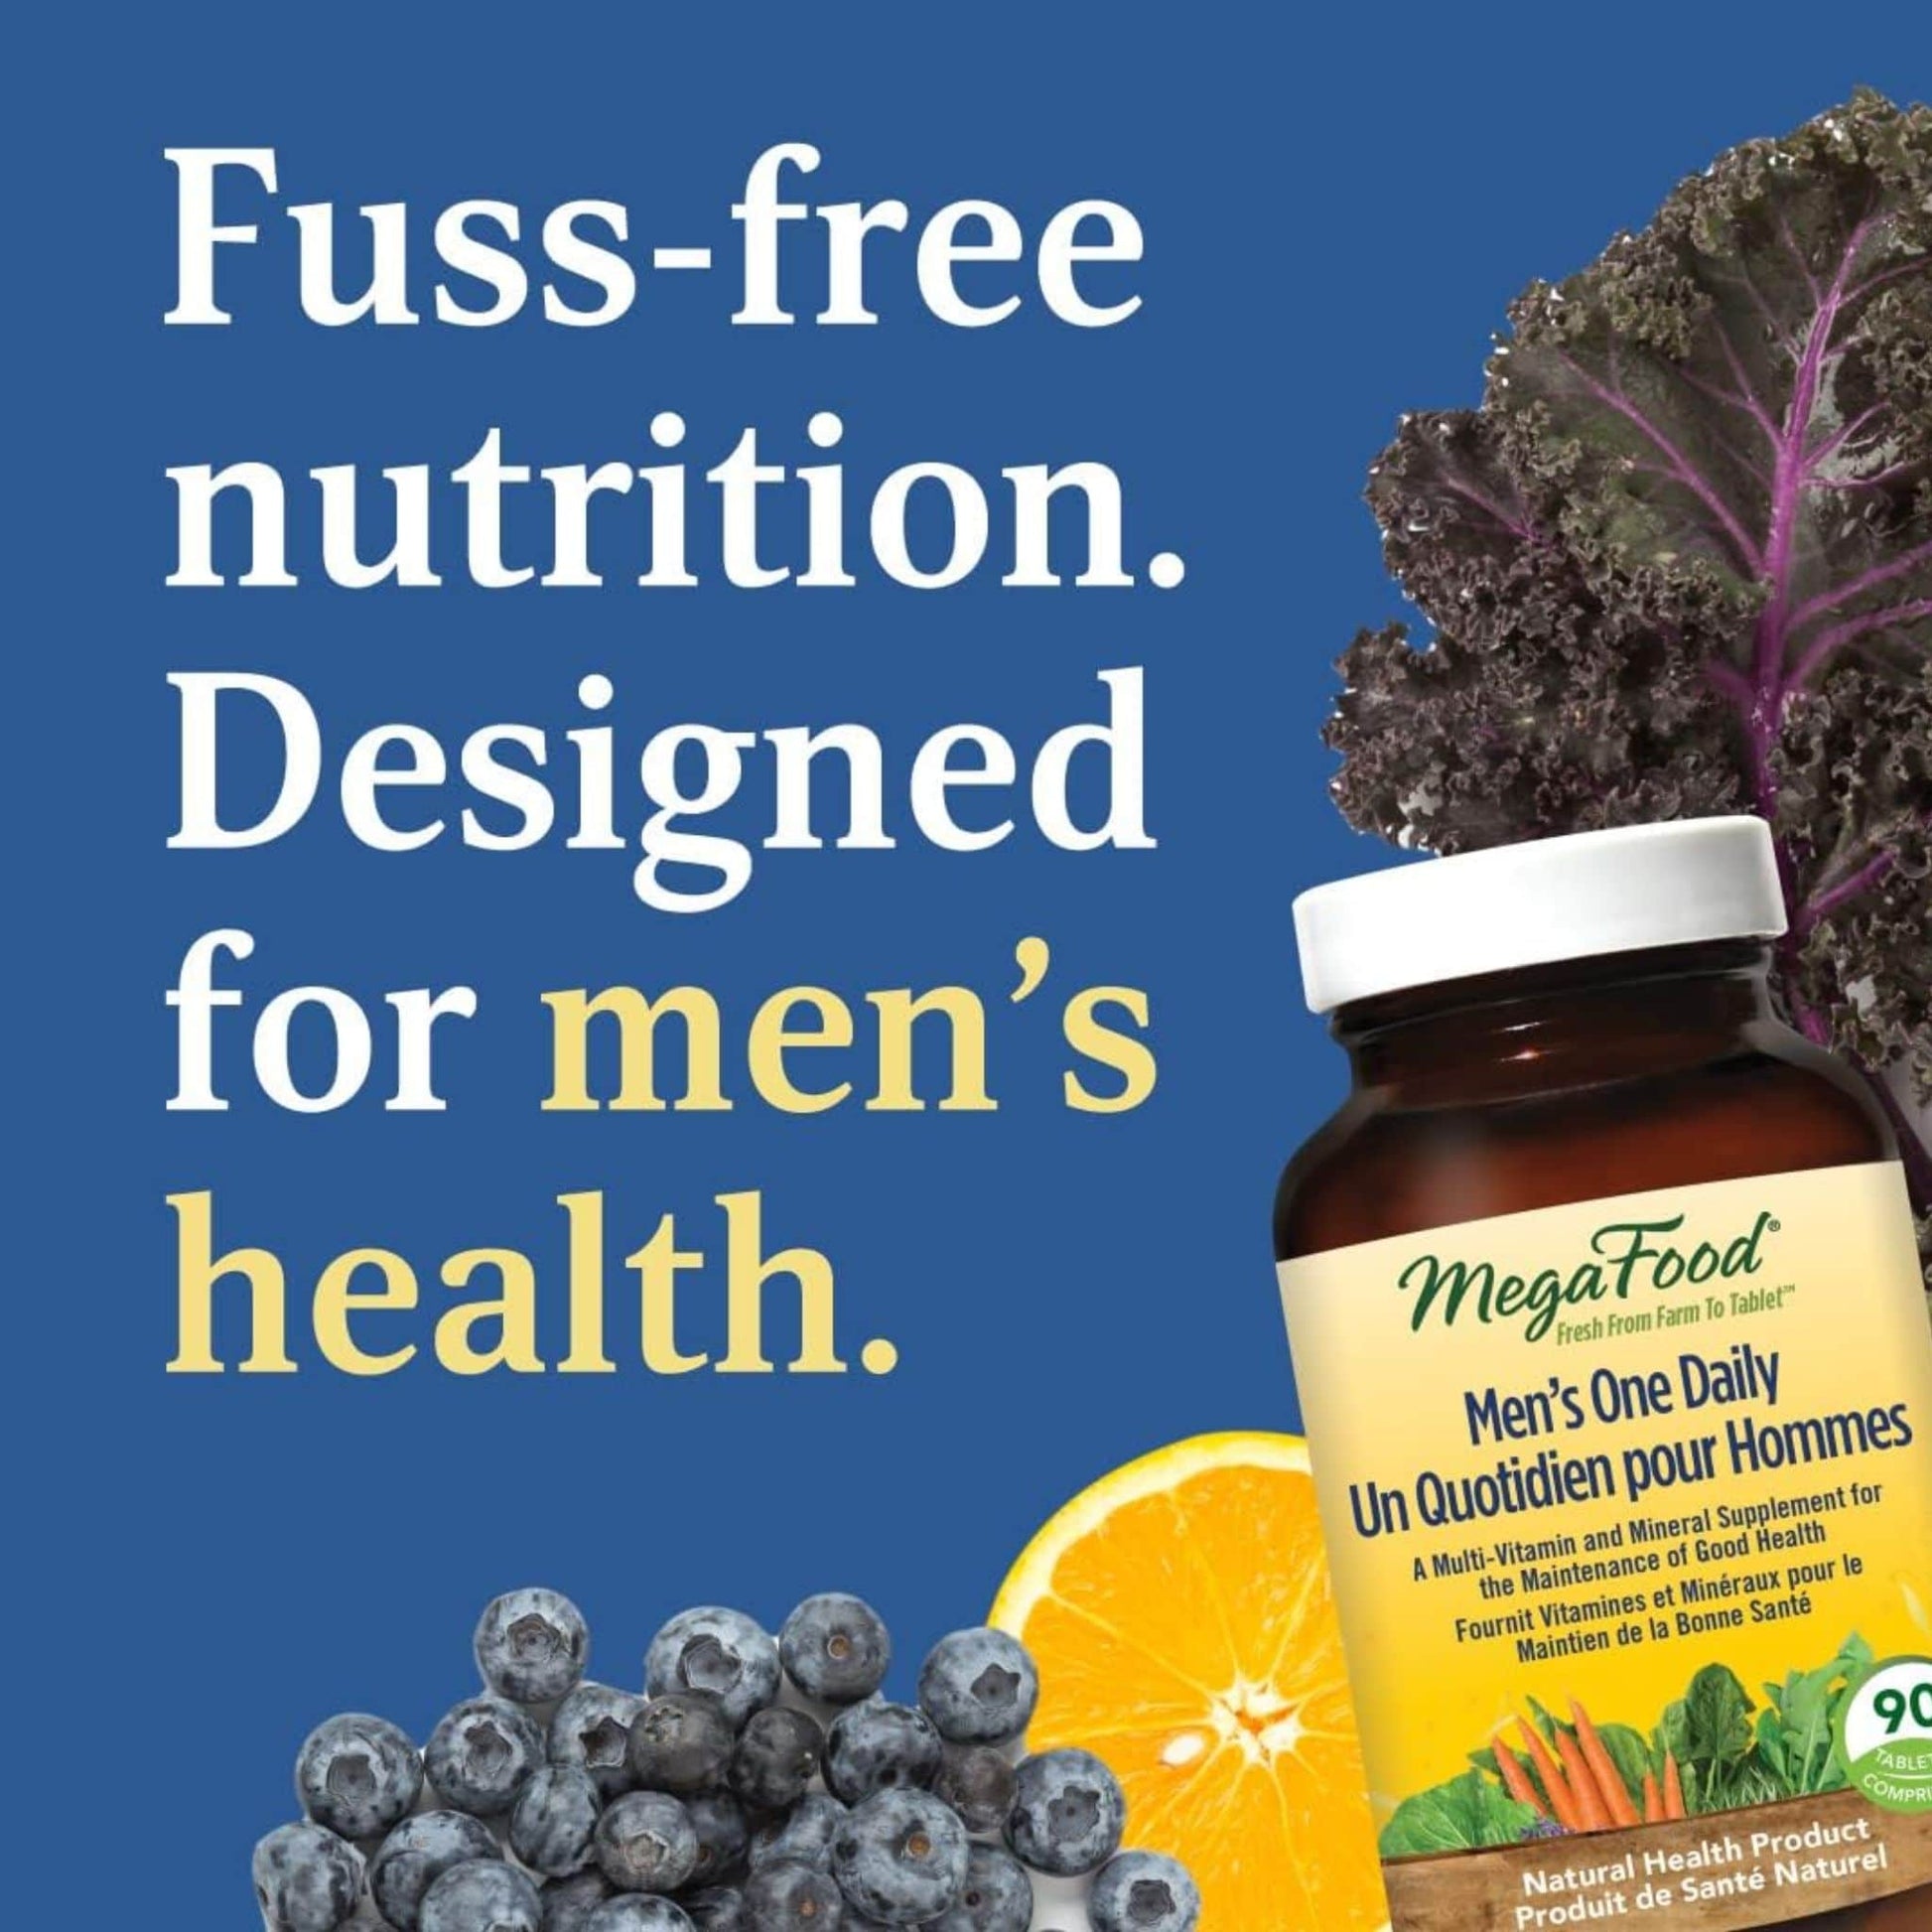 30 Tablets | MegaFood Men's One Daily Multivitamin and Mineral Supplement